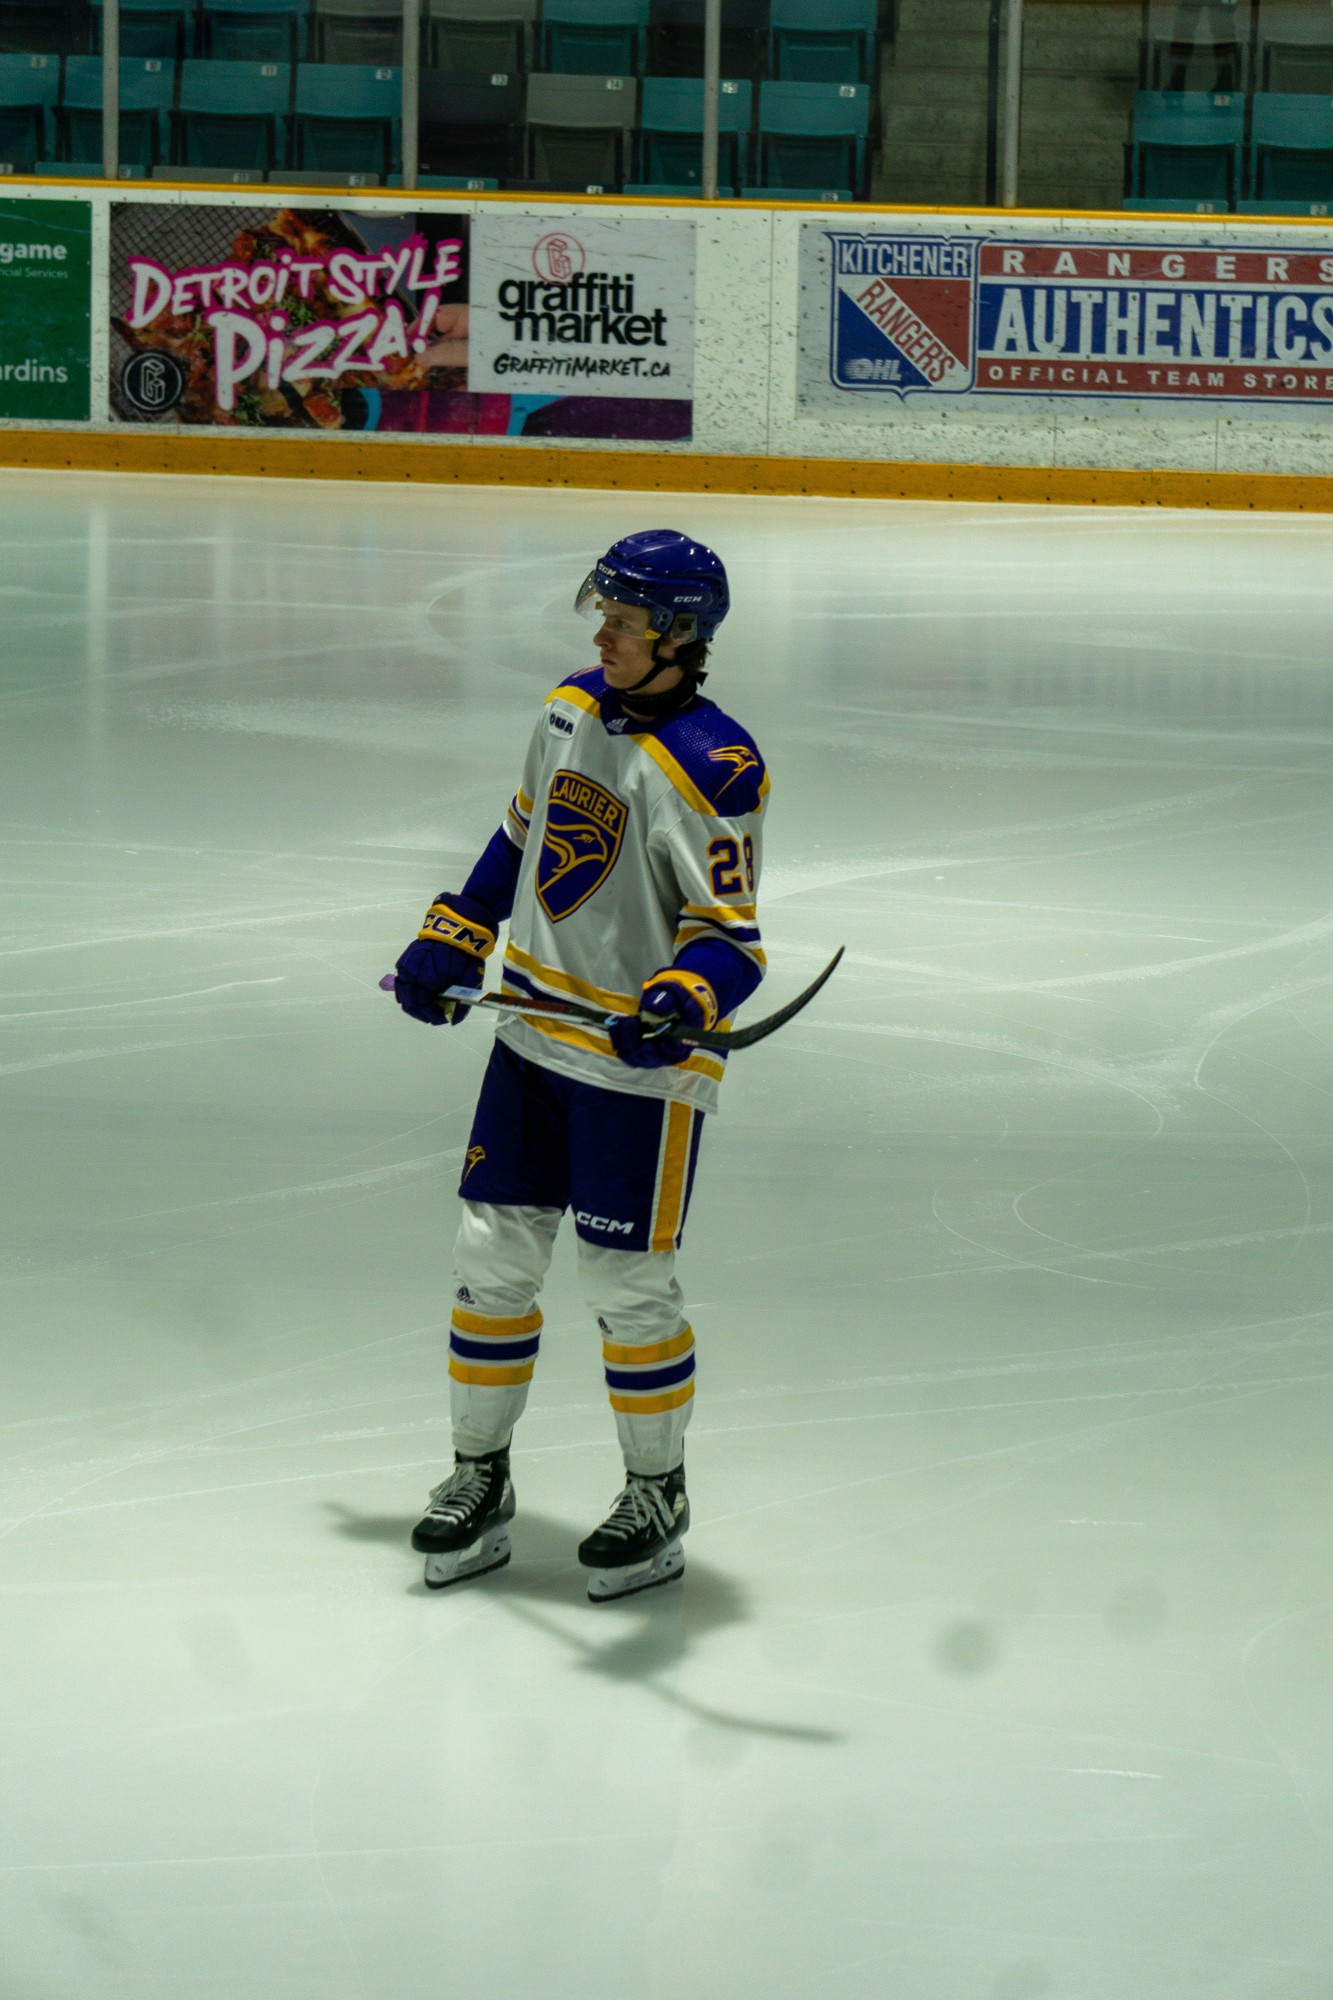 Laurier men's hockey player on the ice